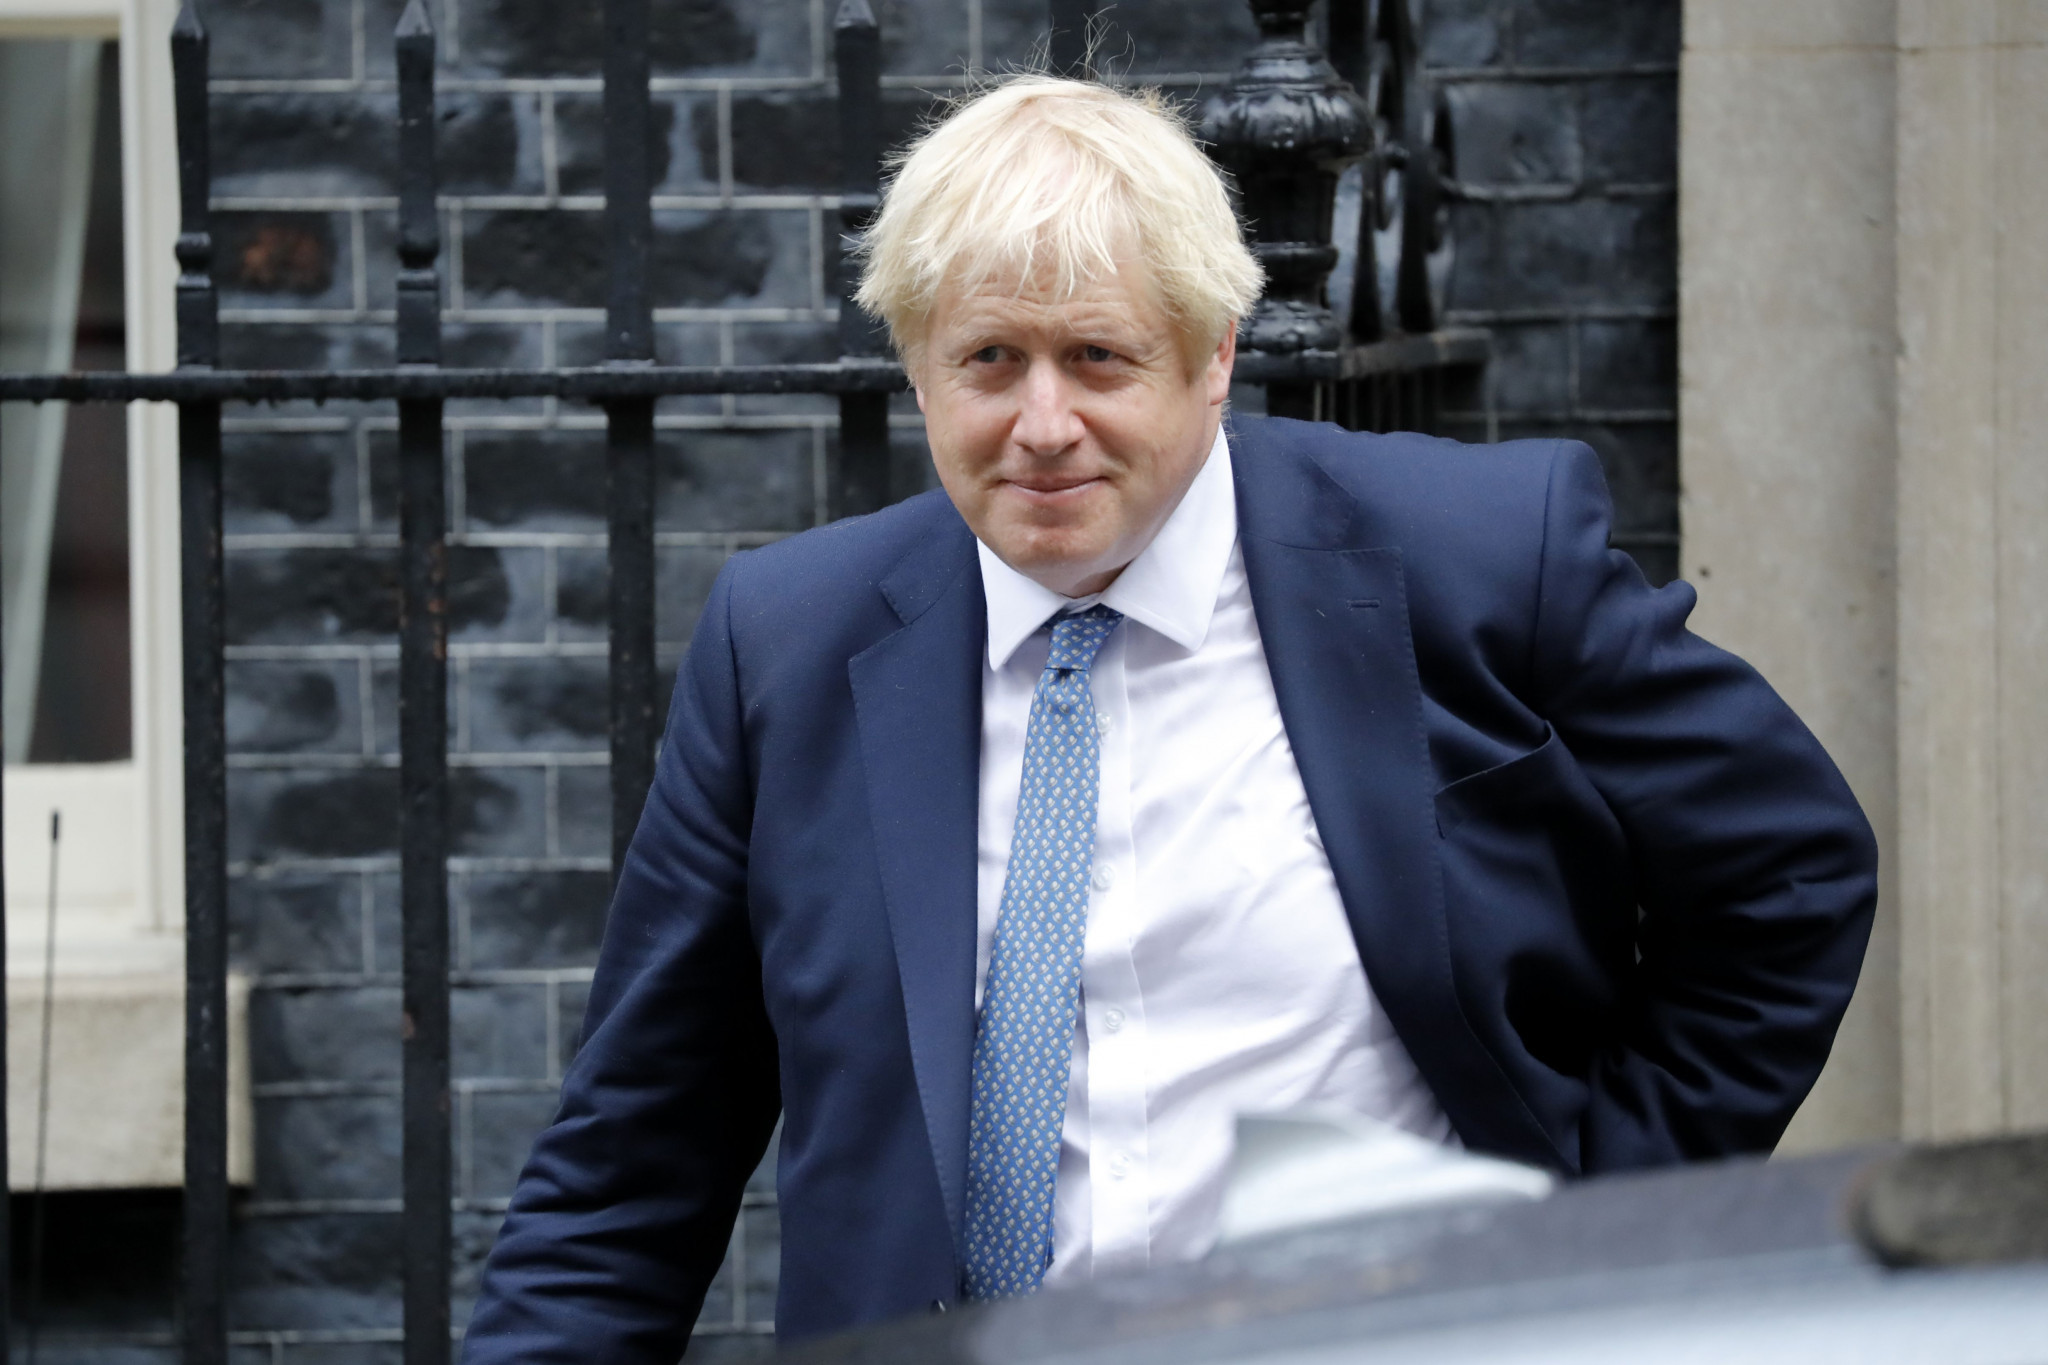 The British Government, led by Prime Minister Boris Johnson, have pledged £50 million to support their country's athletes at Tokyo 2020 ©Getty Images